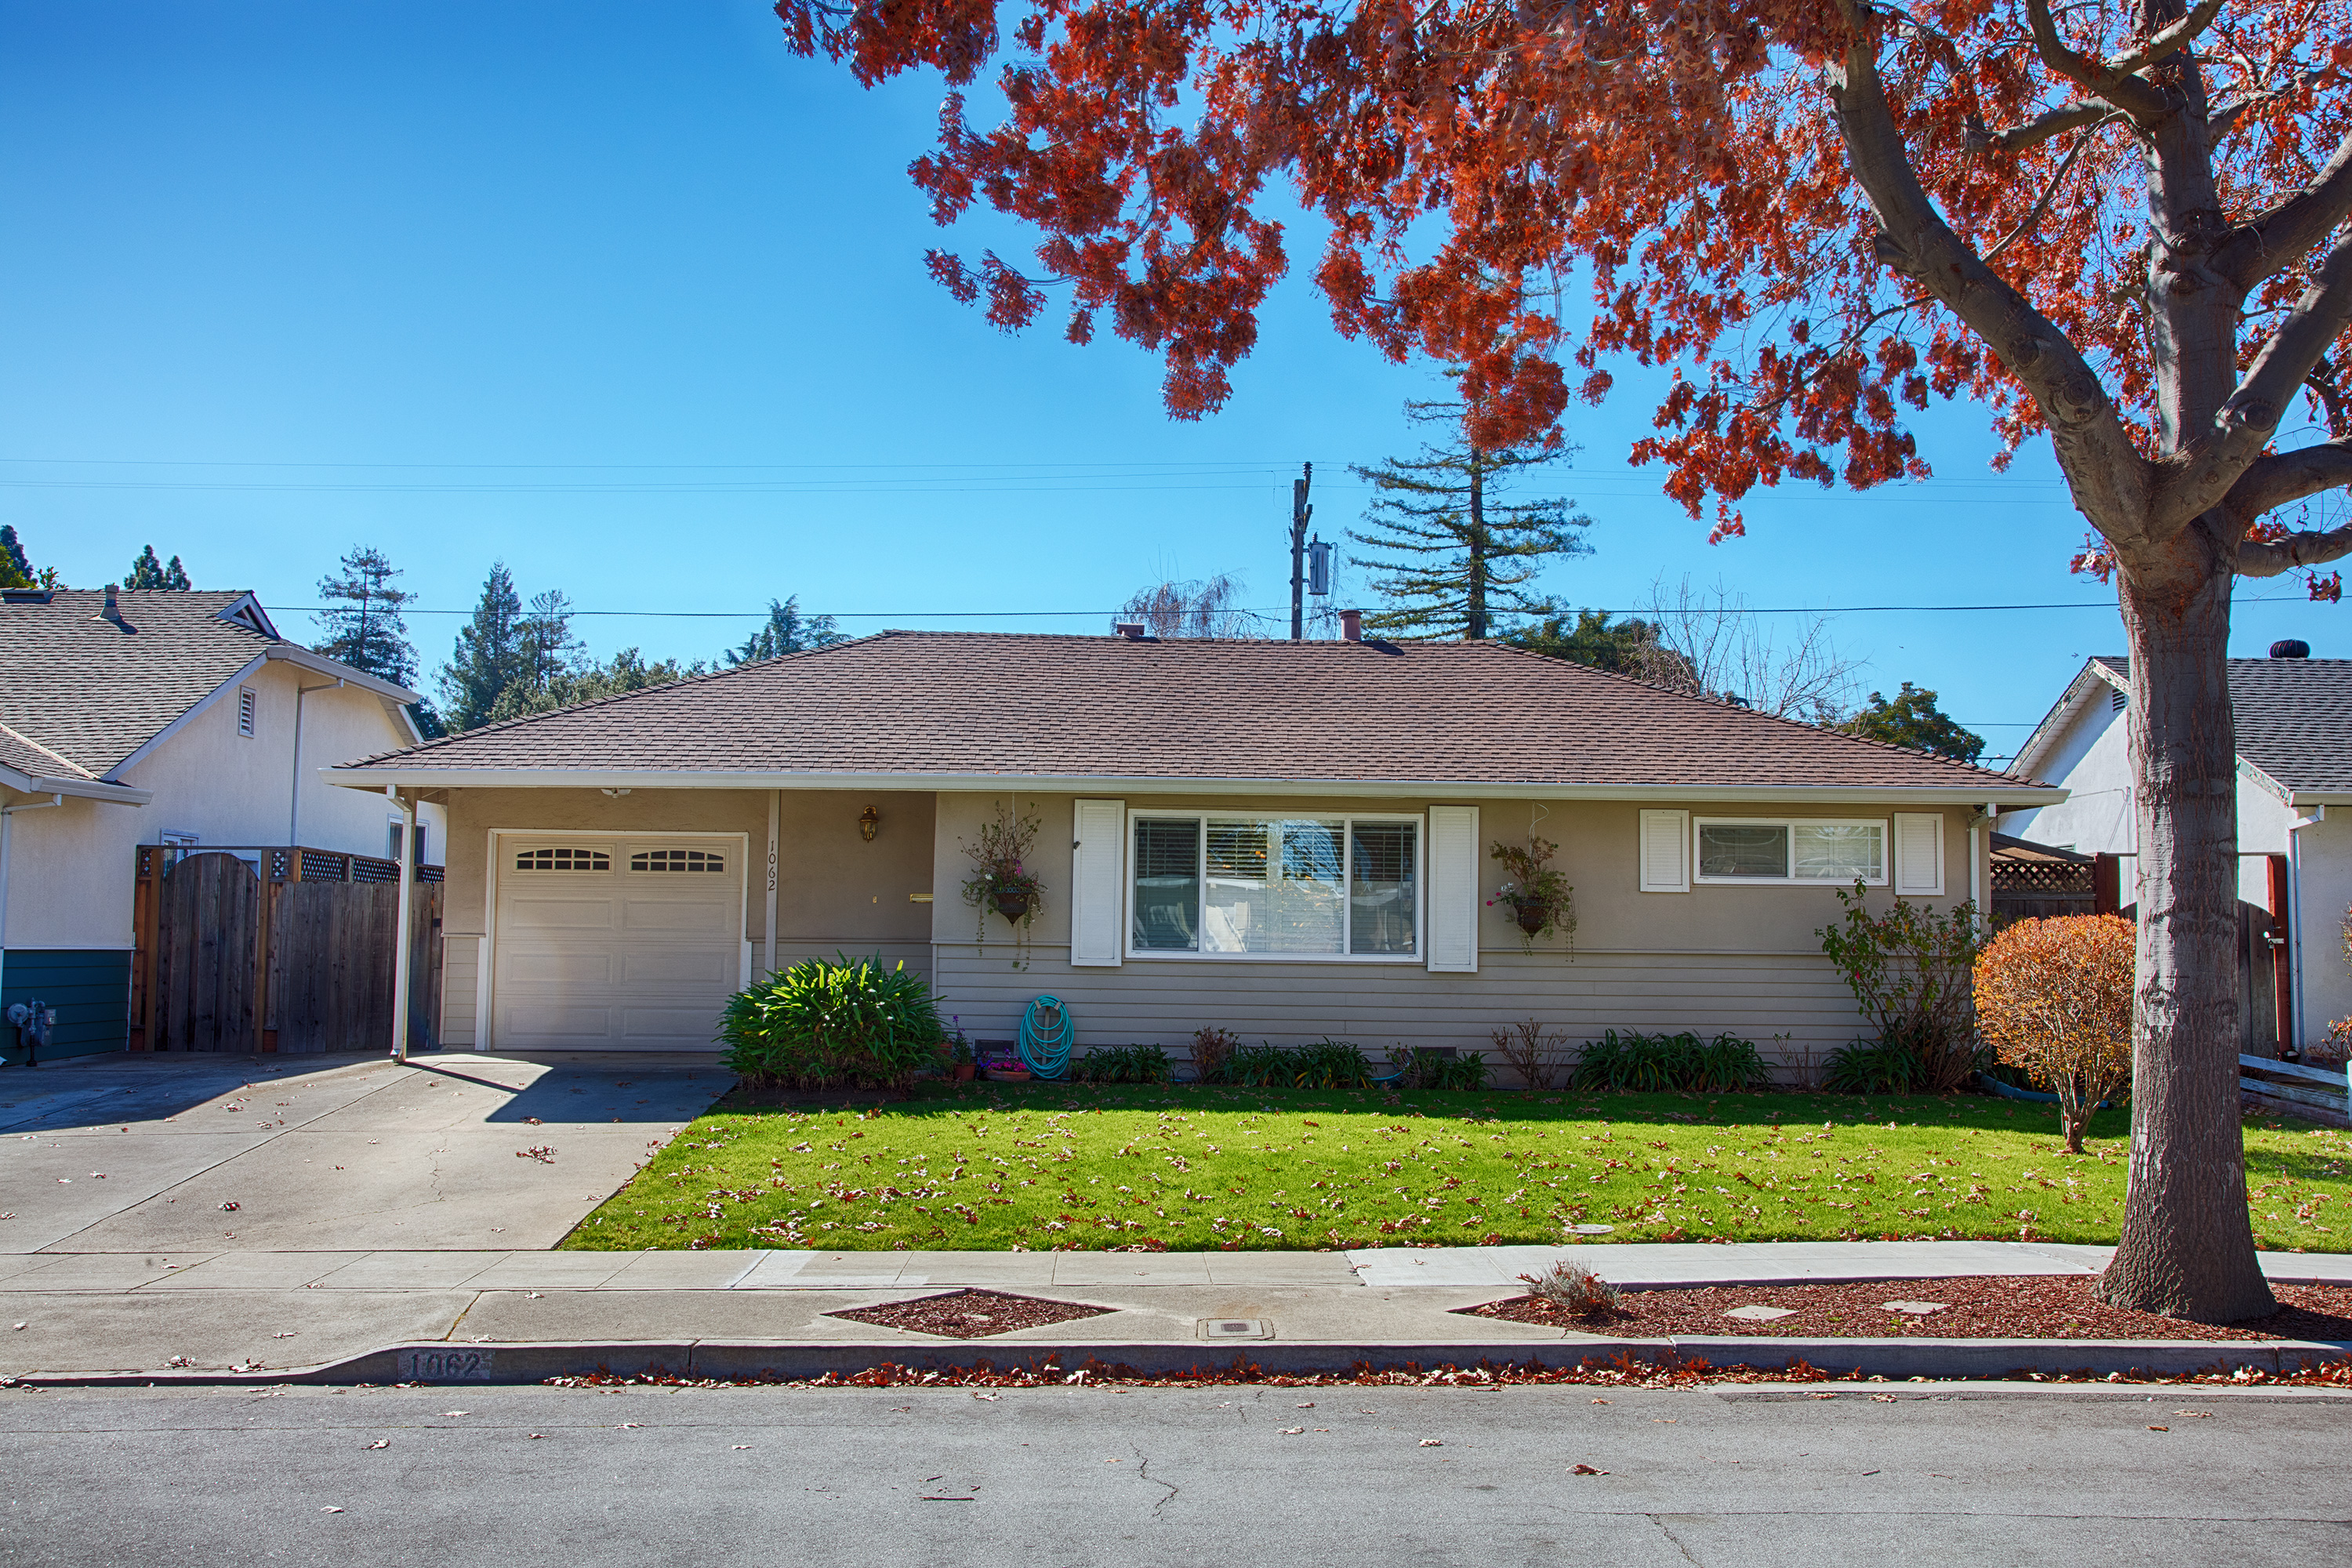 1062 Plymouth Dr, Sunnyvale 94087 - Plymouth Dr 1062 